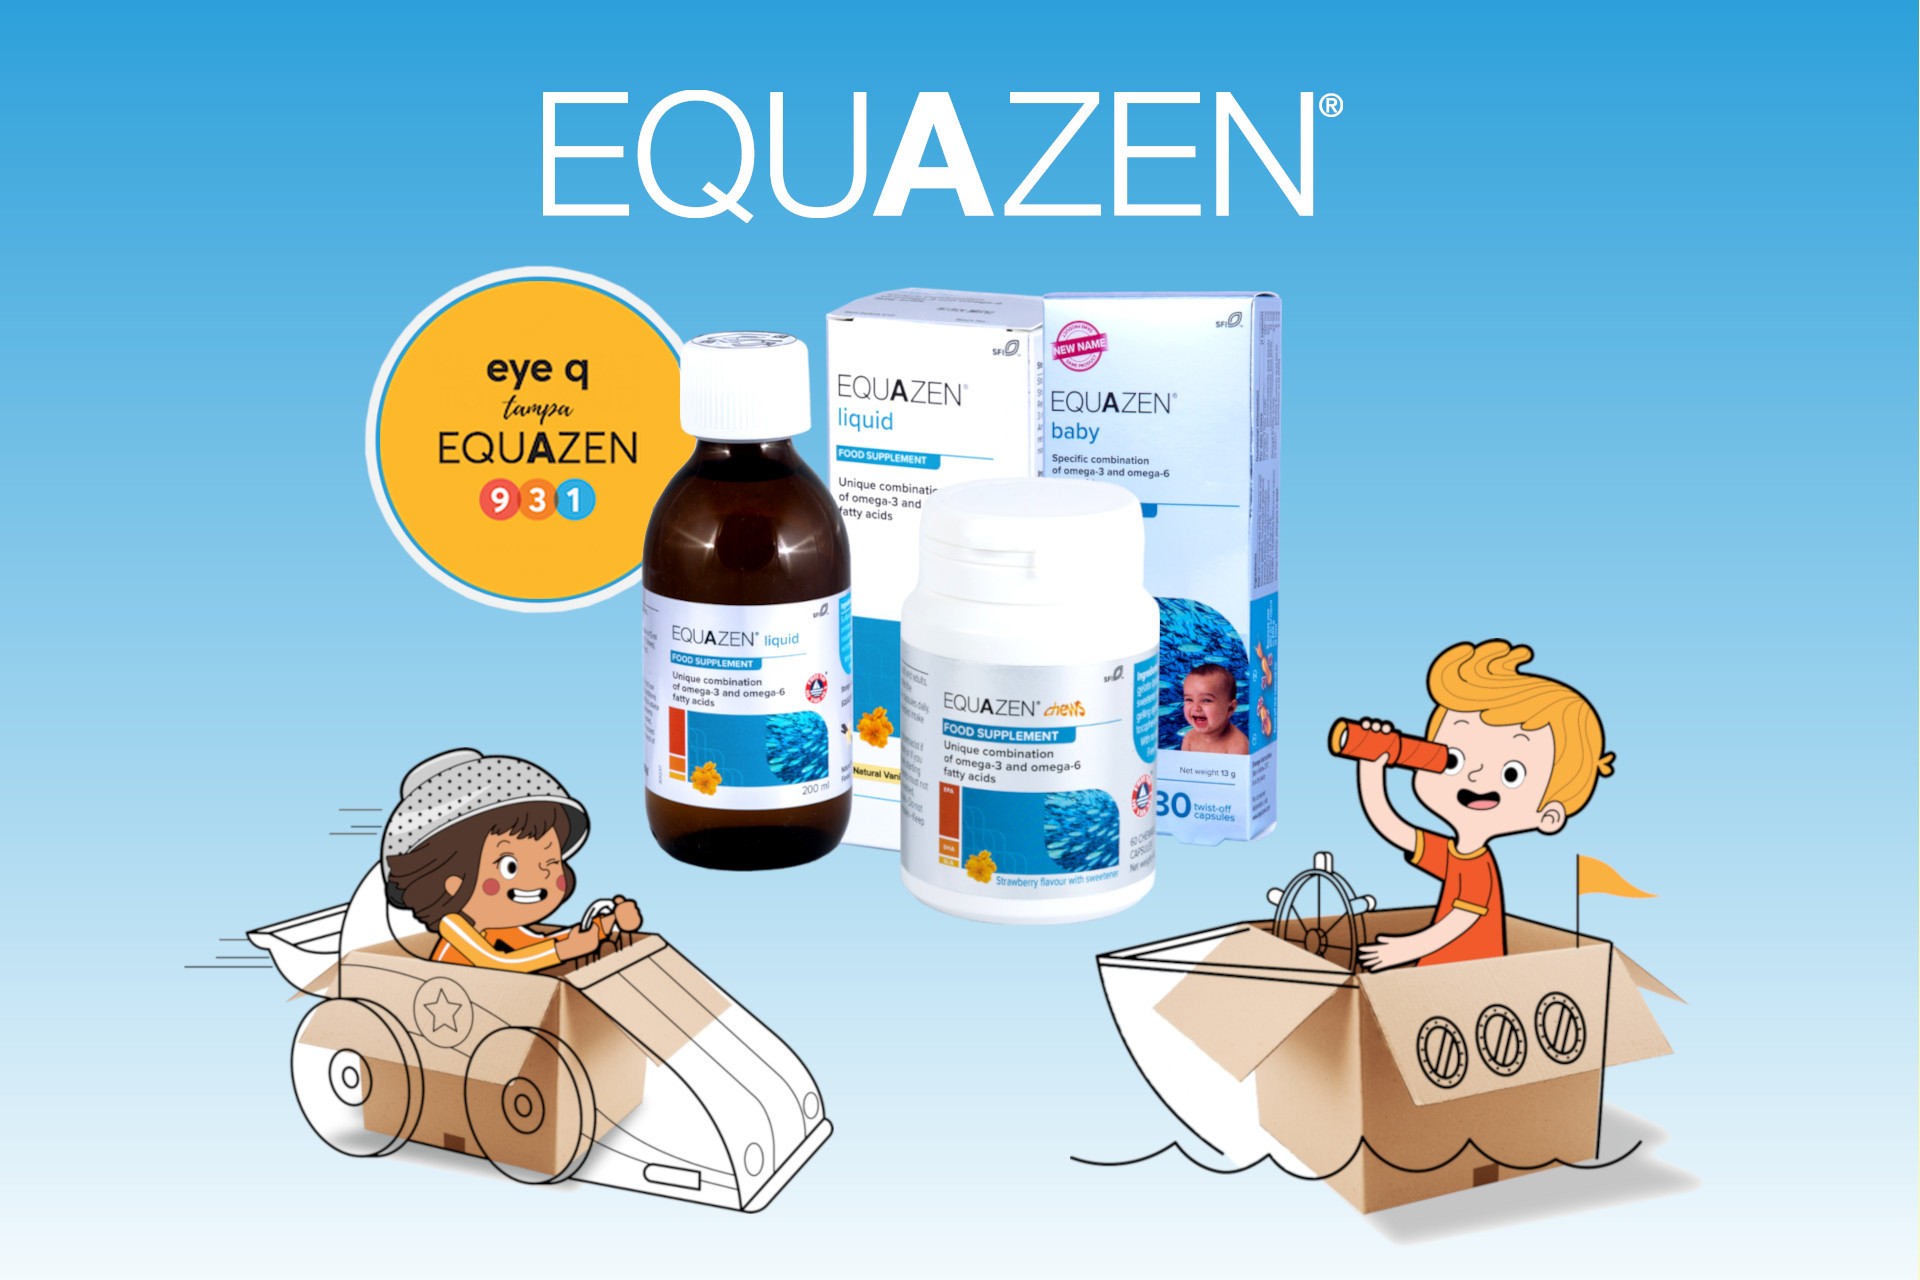 Smarty Pharmacy offers high quality Equazen fish oil for the whole family